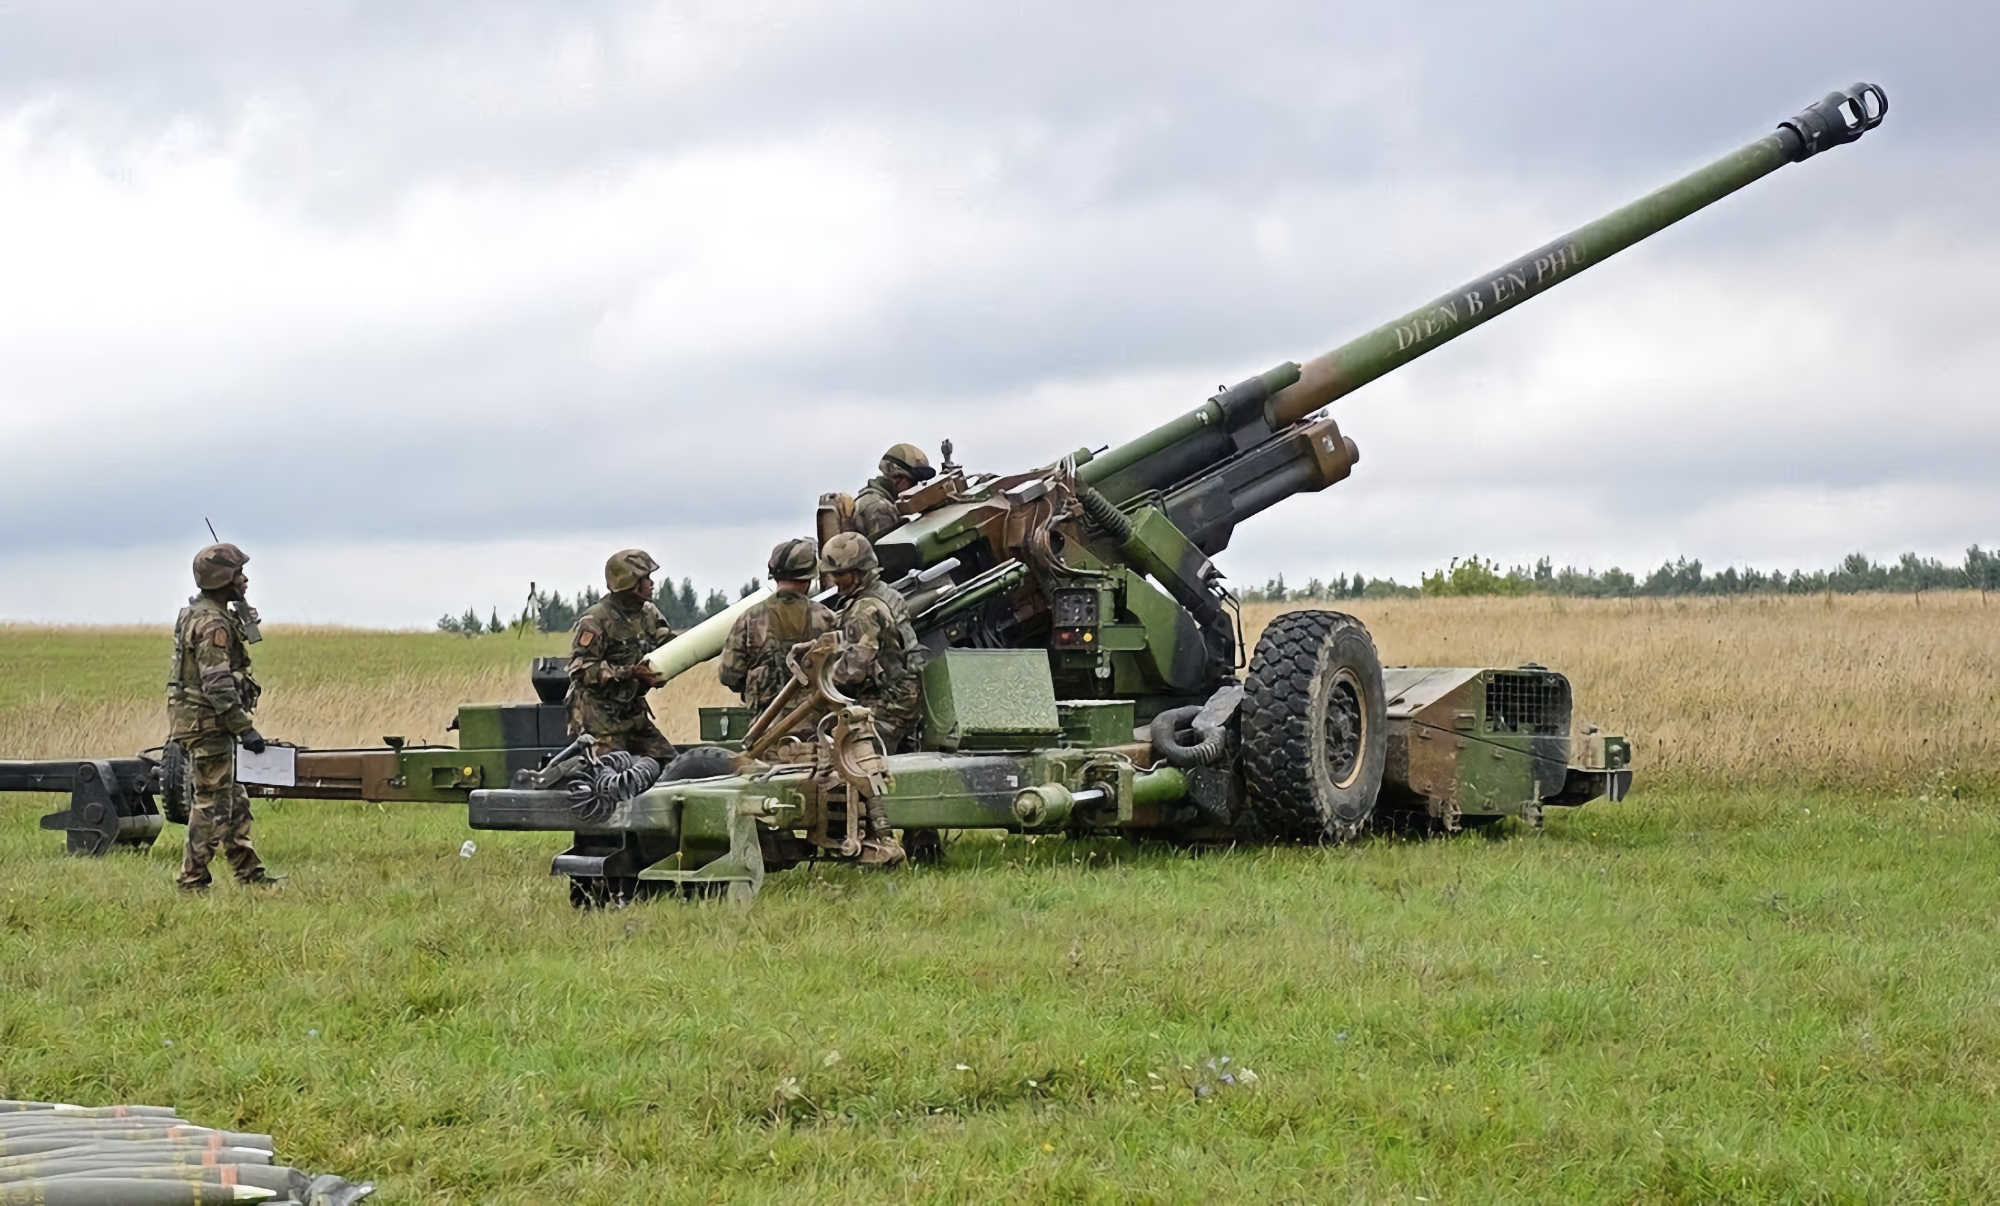 Not only Caesar guns and VAB armored personnel carriers: France will give Ukraine 155-mm TRF1 howitzers, which can shoot up to 30 km